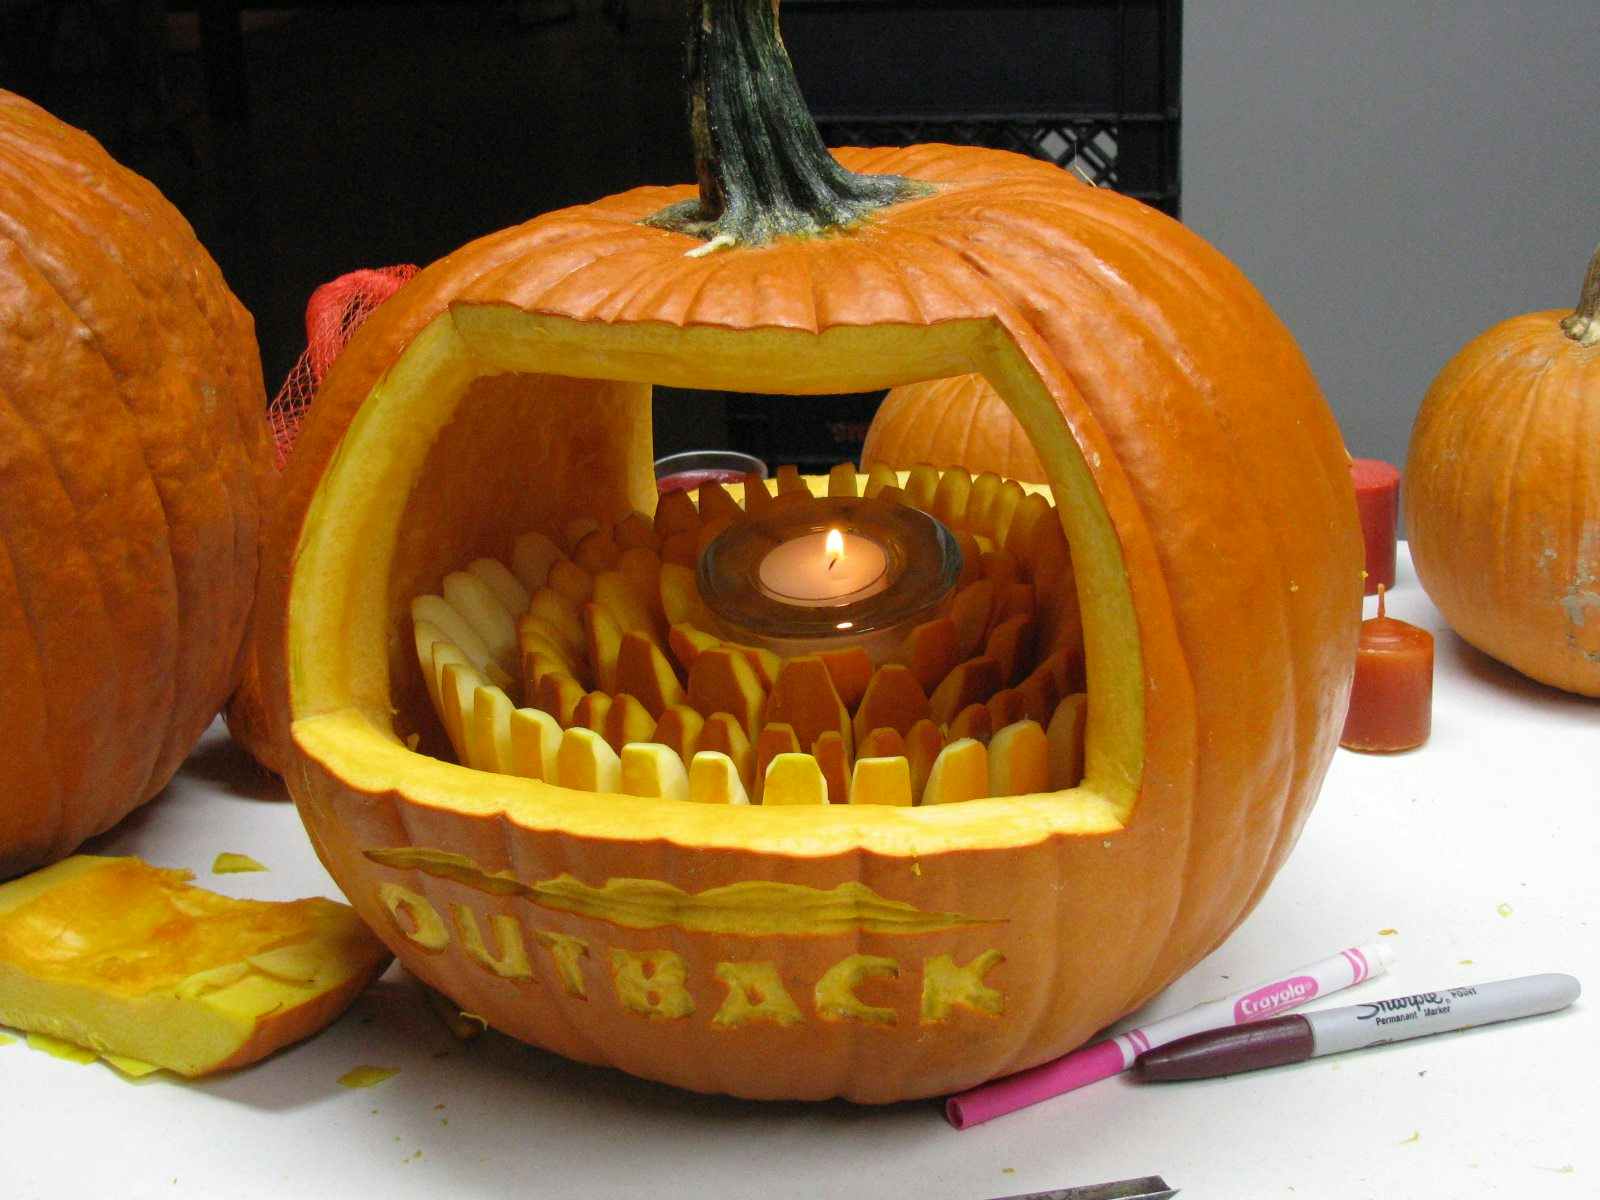 Pumpkin carved with the outback steakhouse logo and a bloomin onion inside